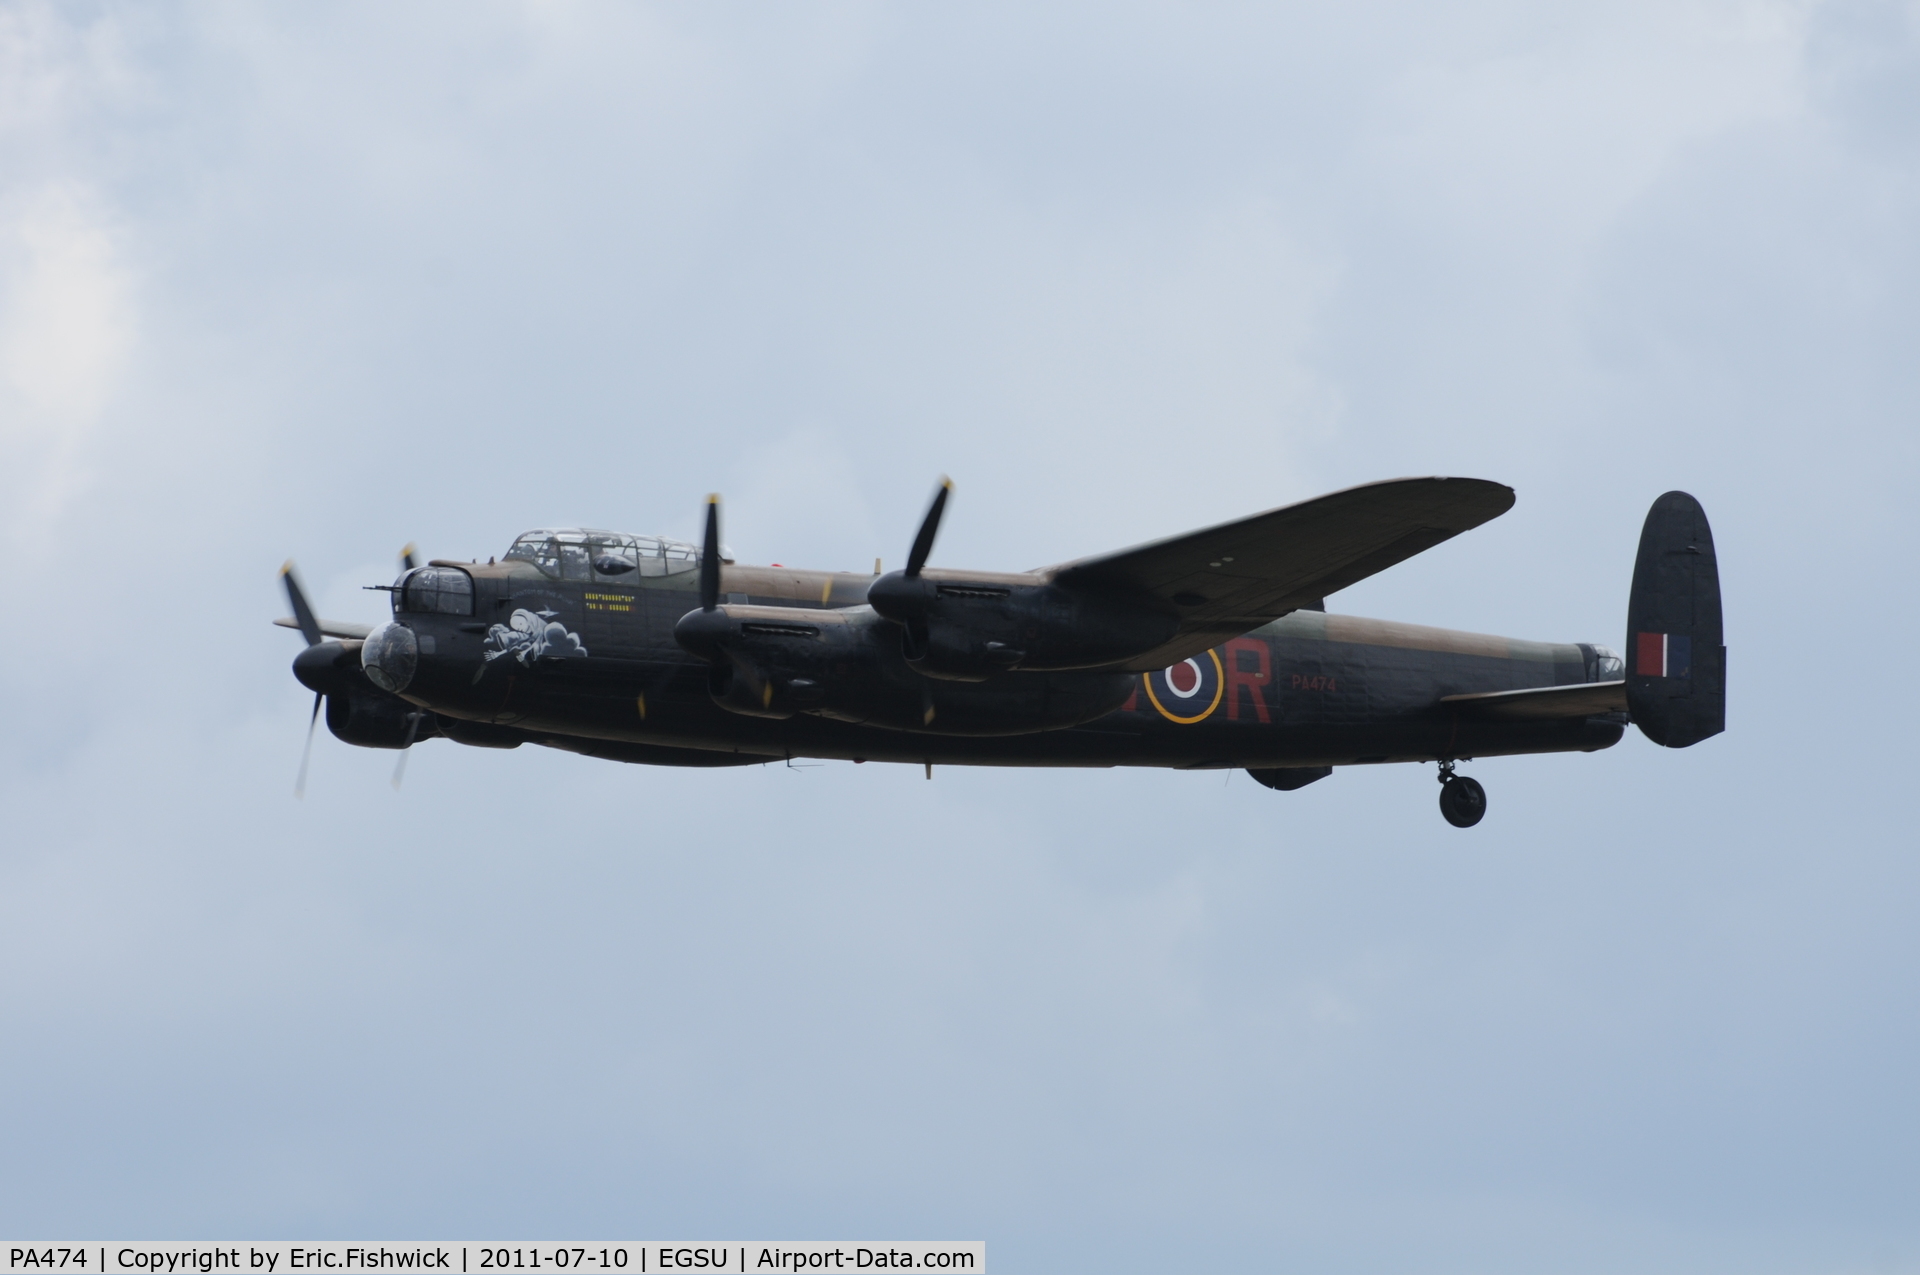 PA474, 1945 Avro 683 Lancaster B1 C/N VACH0052/D2973, PA474 - 'Phantom of the Ruhr’ - at another excellent Flying Legends Air Show (July 2011)